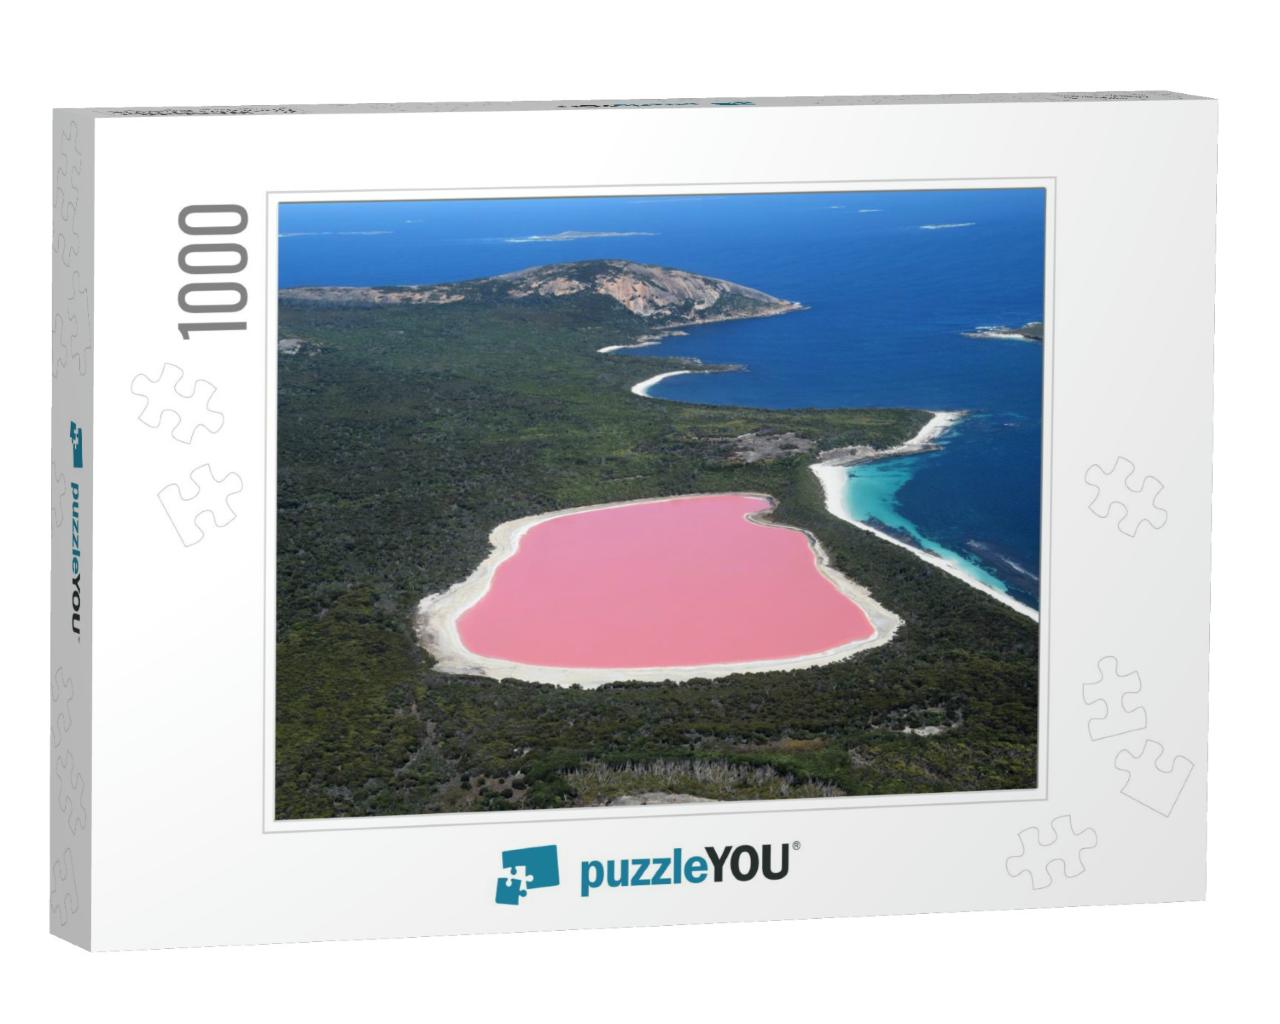 The Amazing Lake Hillier, So-Called Pink Lake, Famous Lan... Jigsaw Puzzle with 1000 pieces